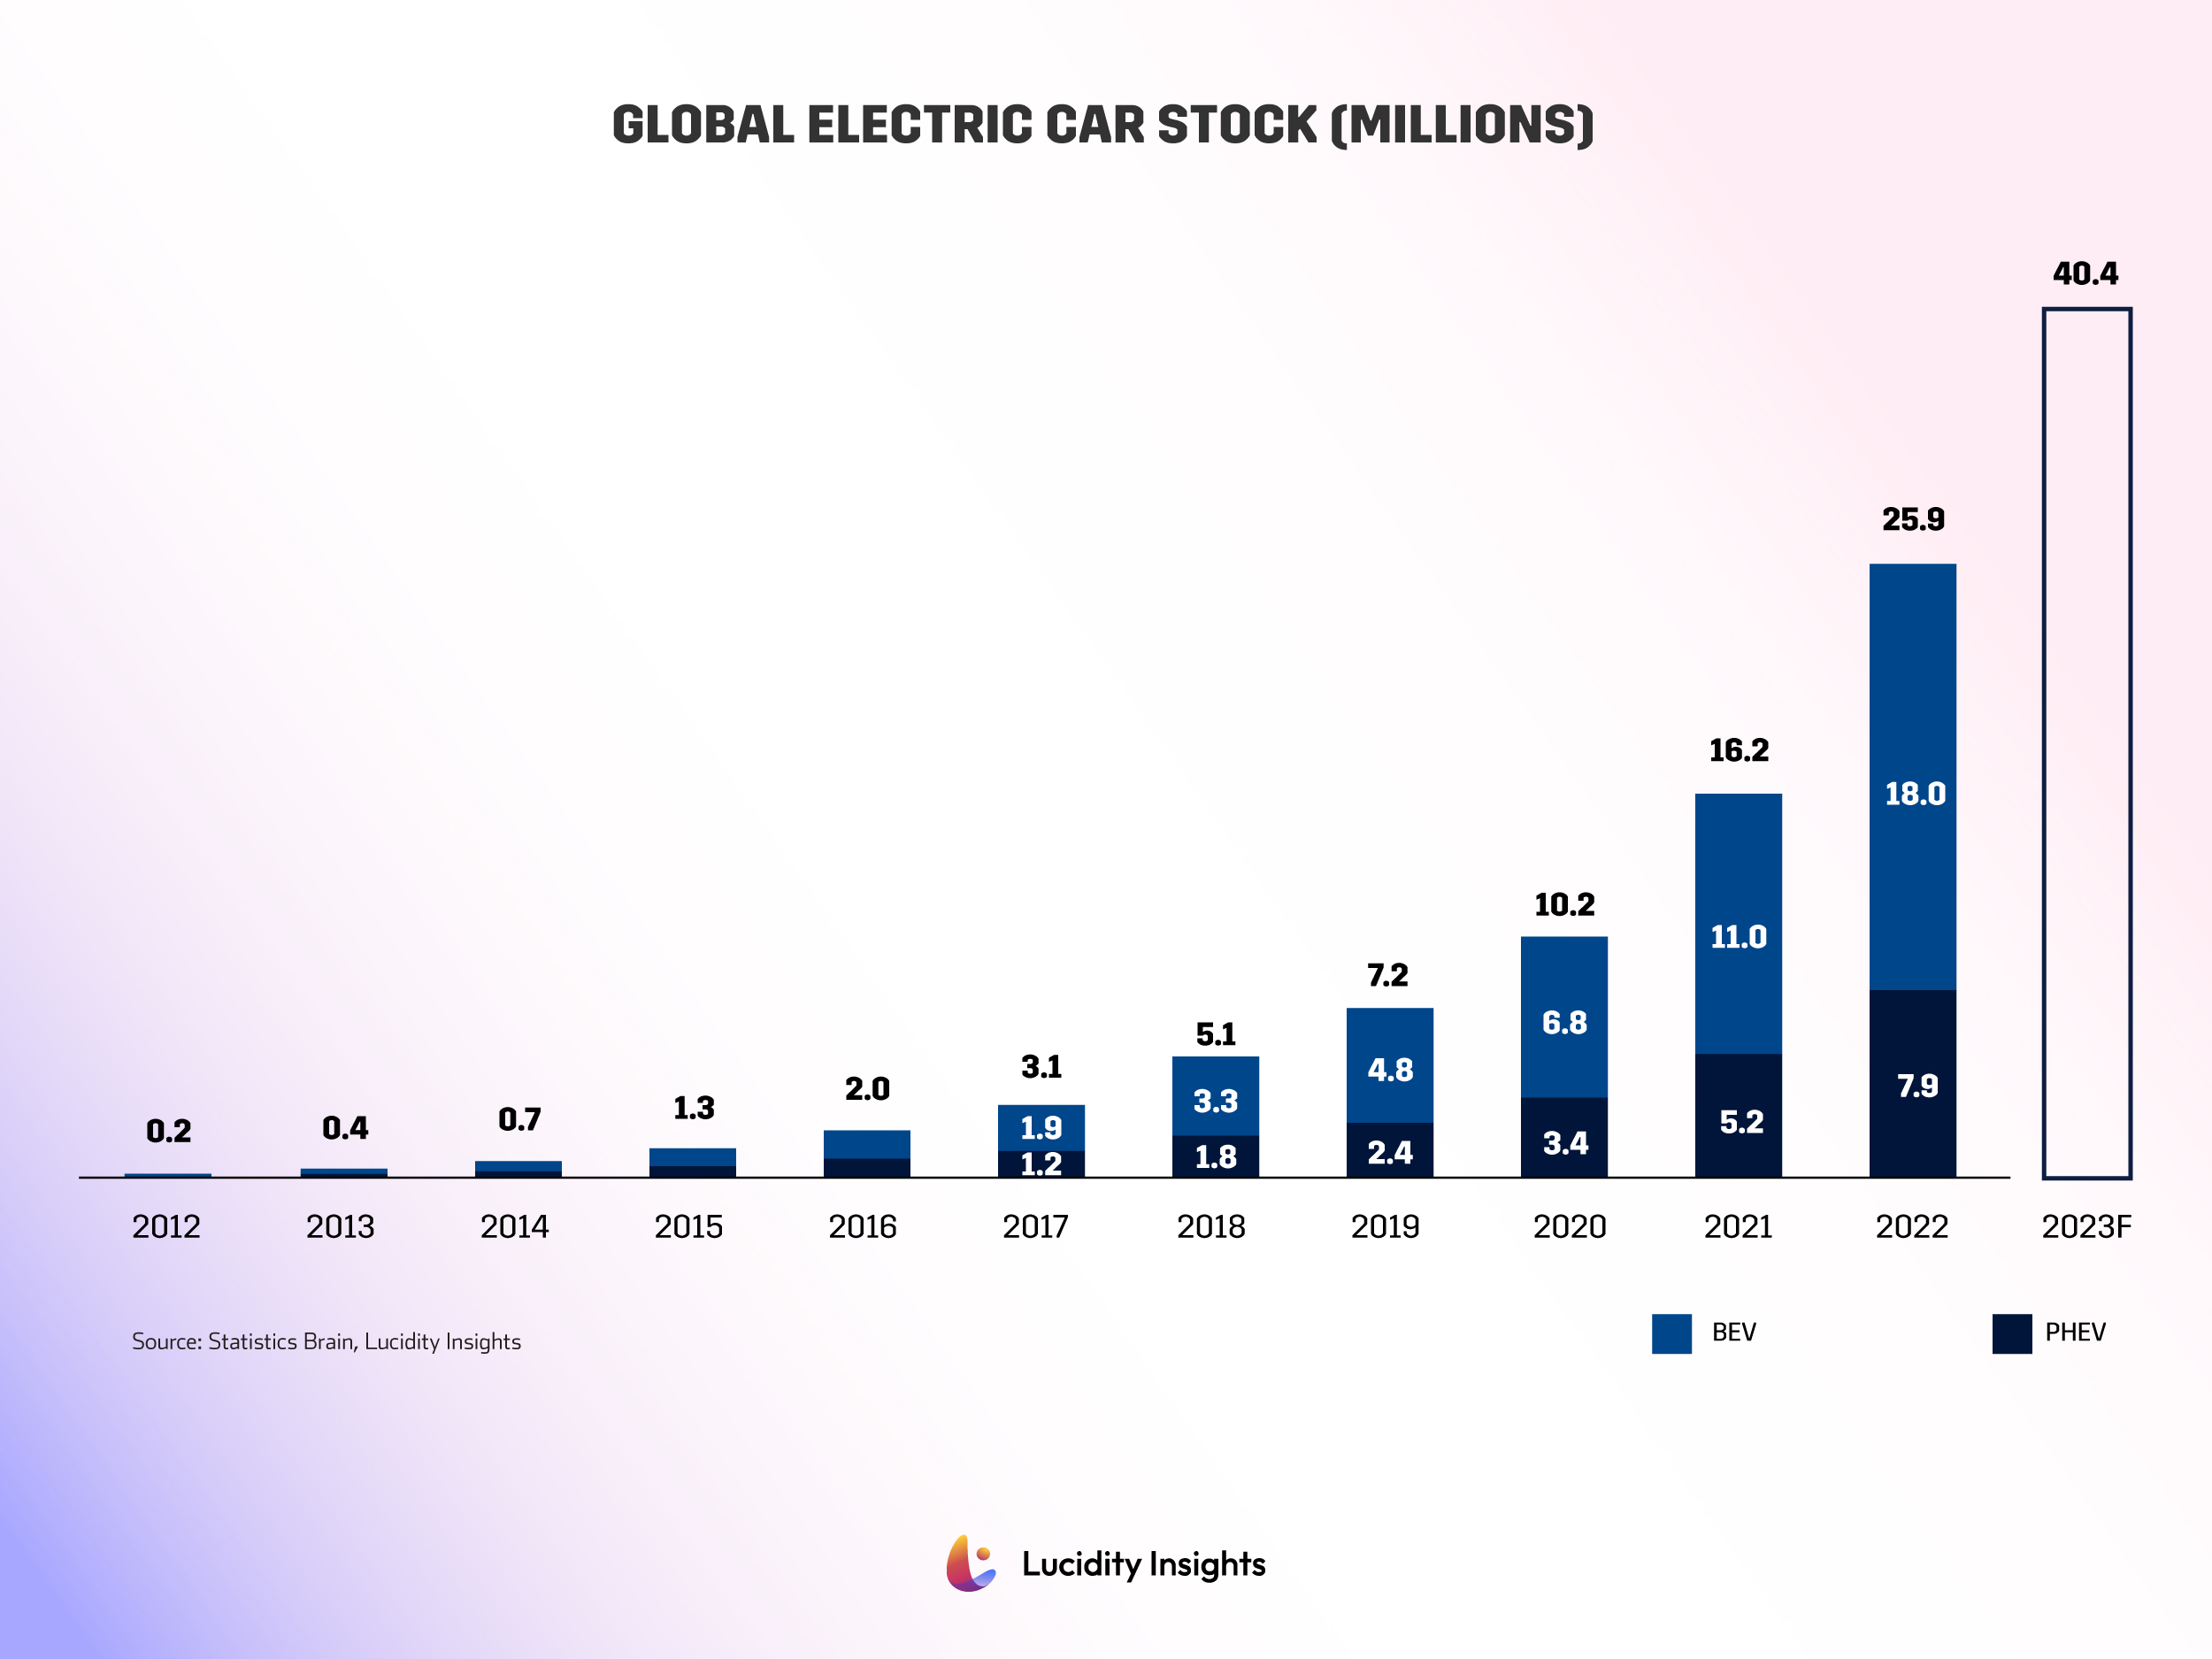 Global Electric Car Stock (Millions) Over the Years